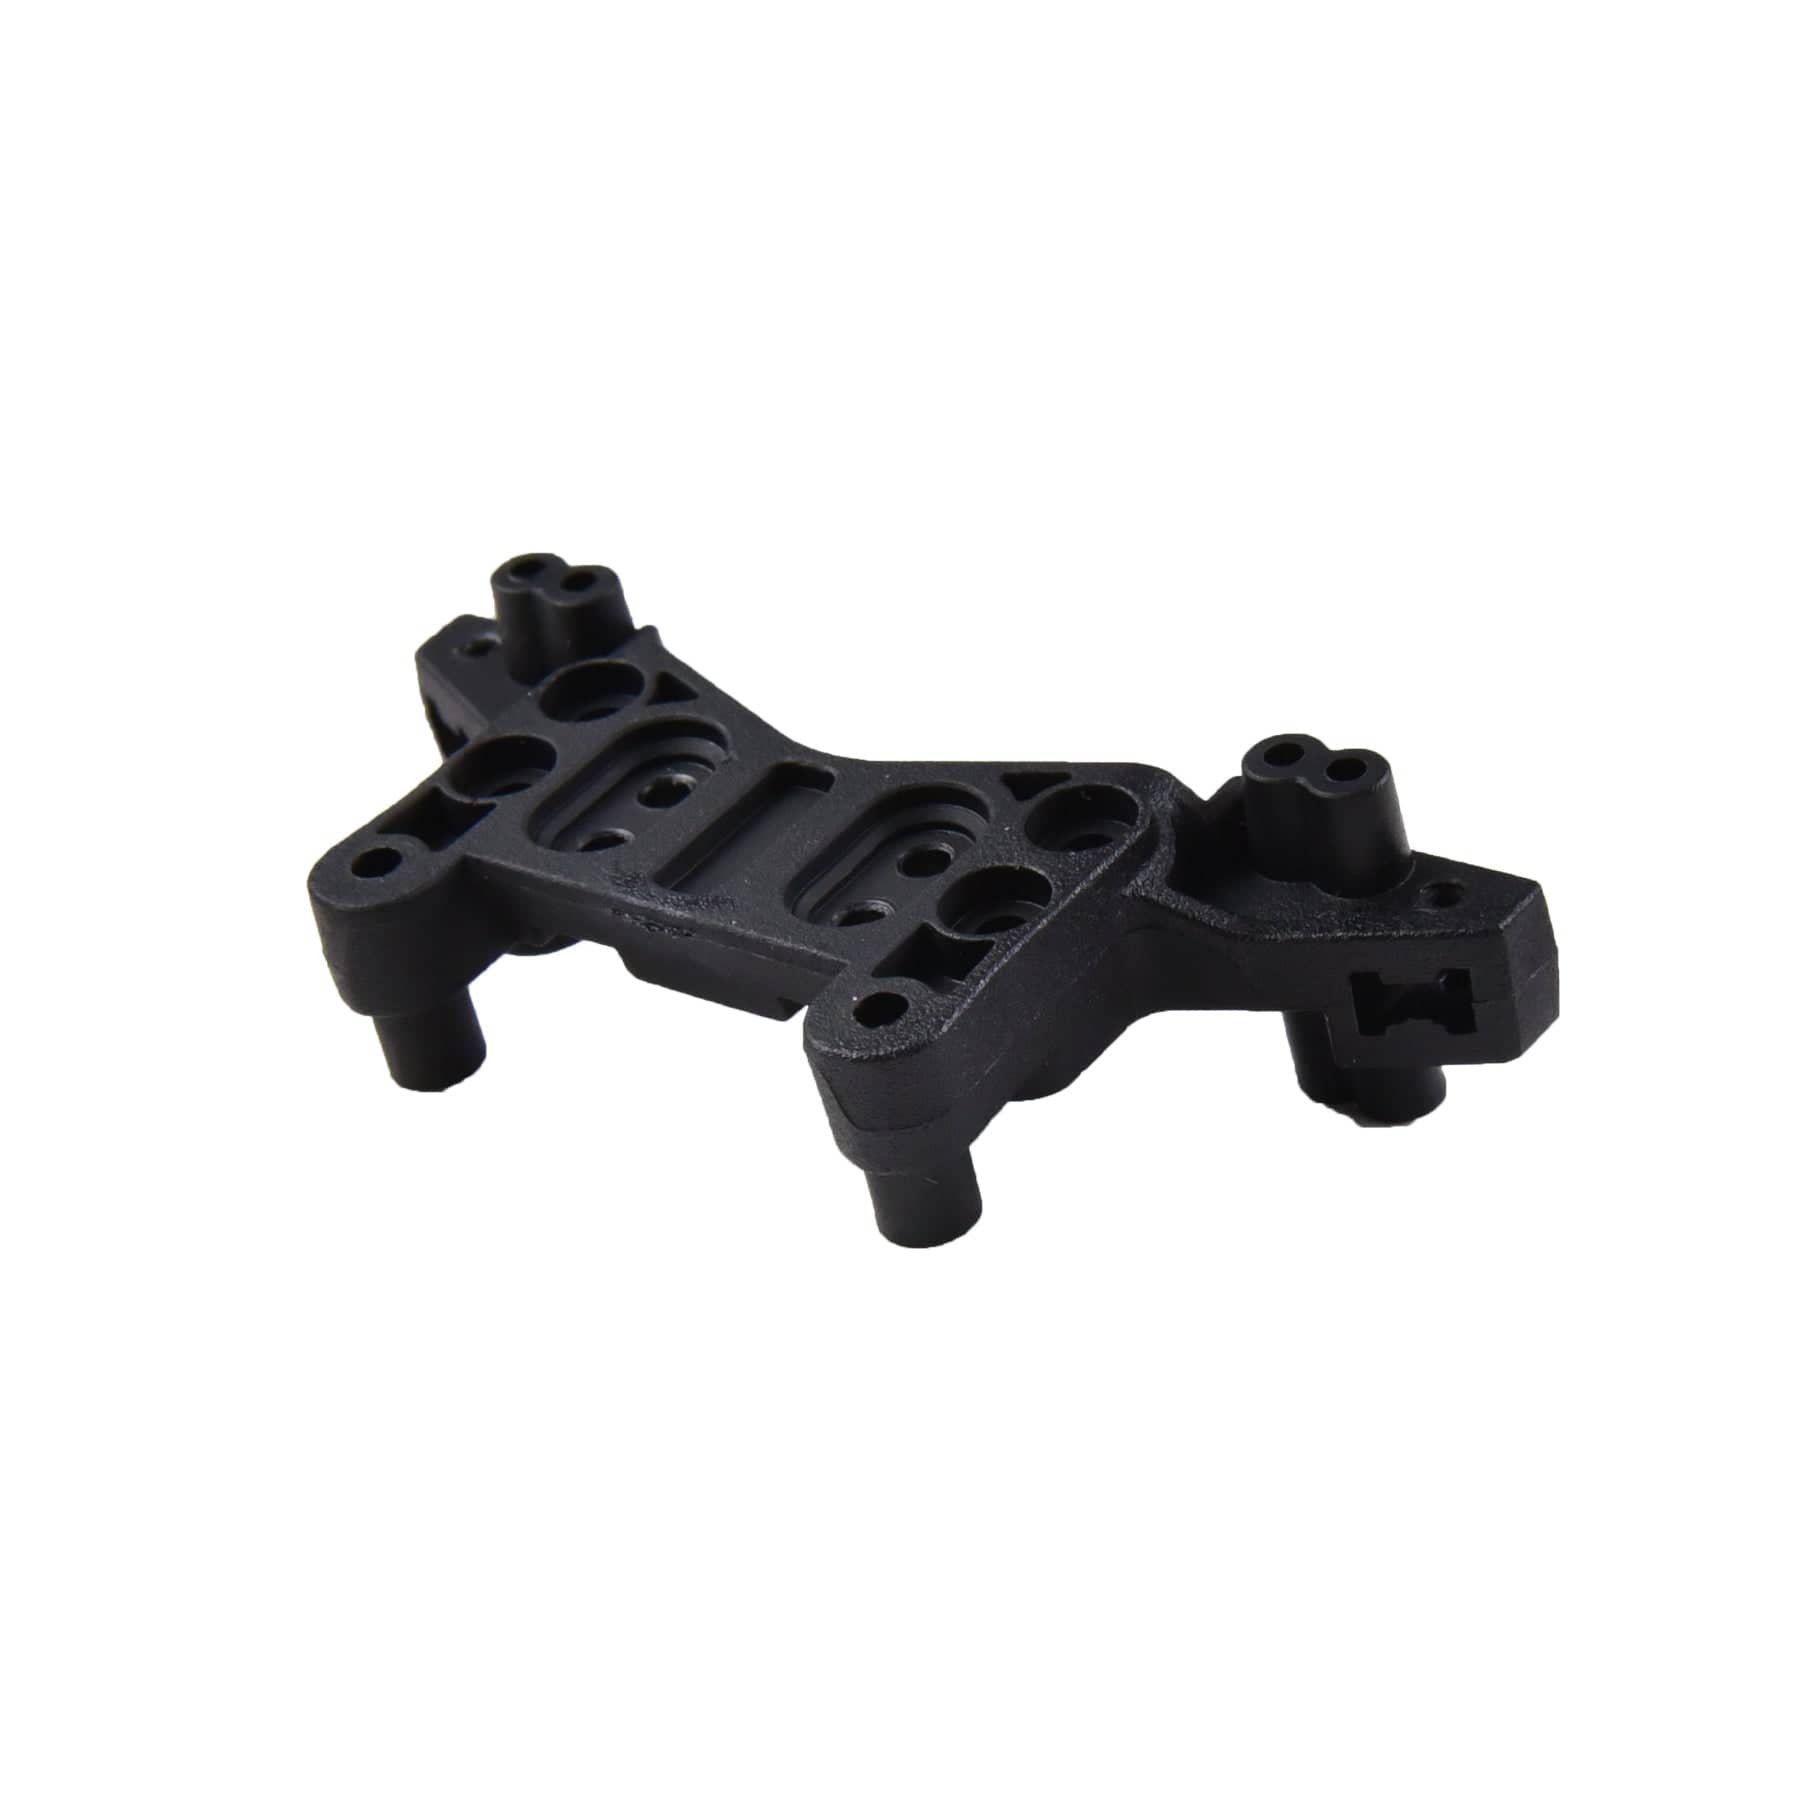 Hosim RC Car Rear Shock Proof Plank 16180 Parts for 1:16 H16P H07 H17 HB17 RC Truck